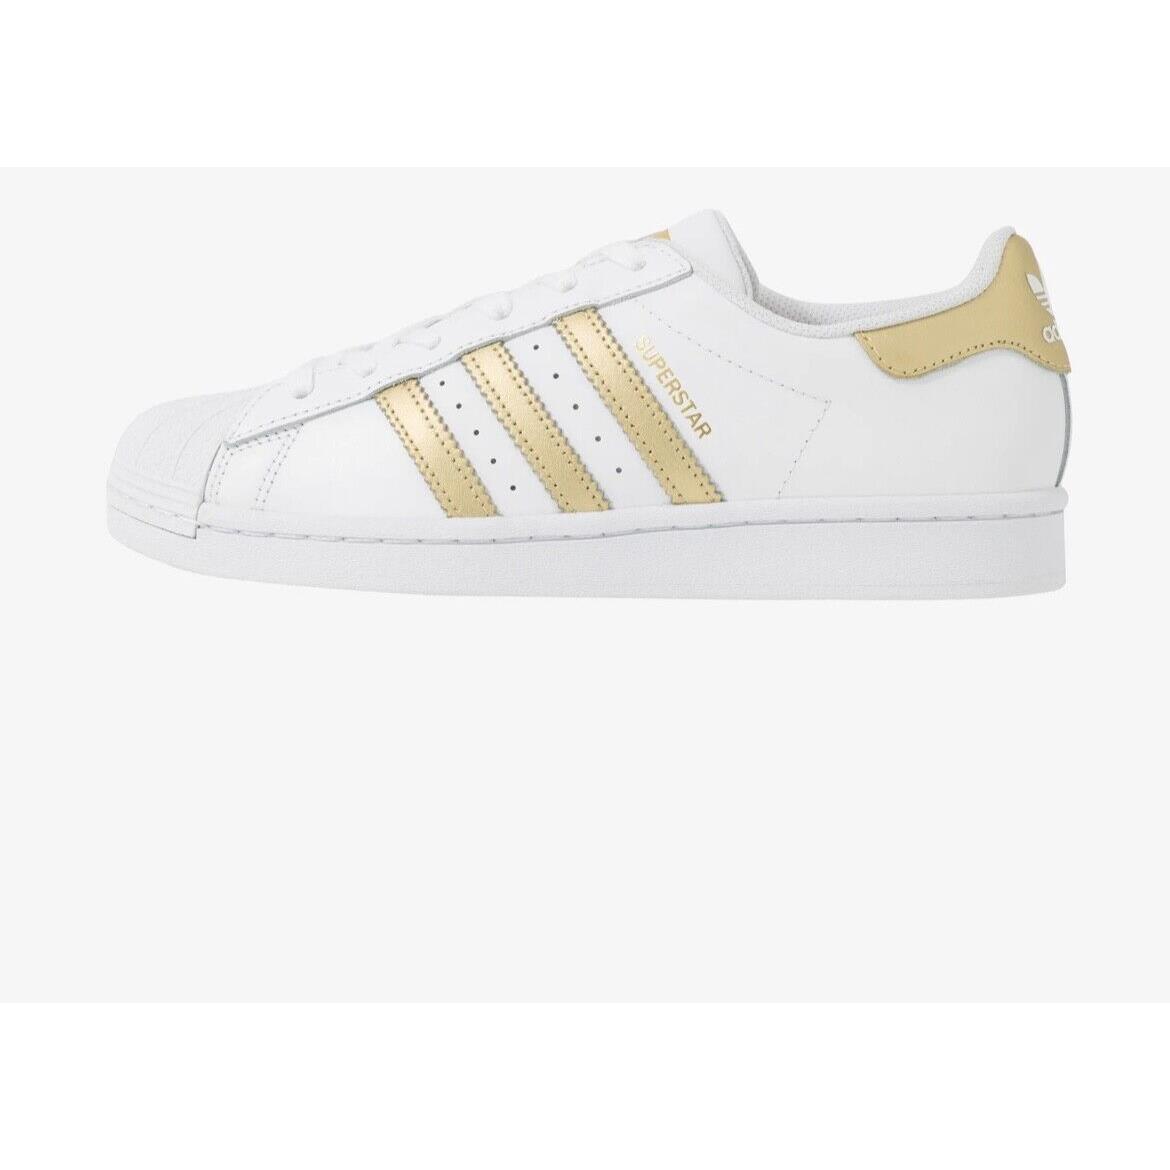 Adidas shoes Superstar - White Gold 1